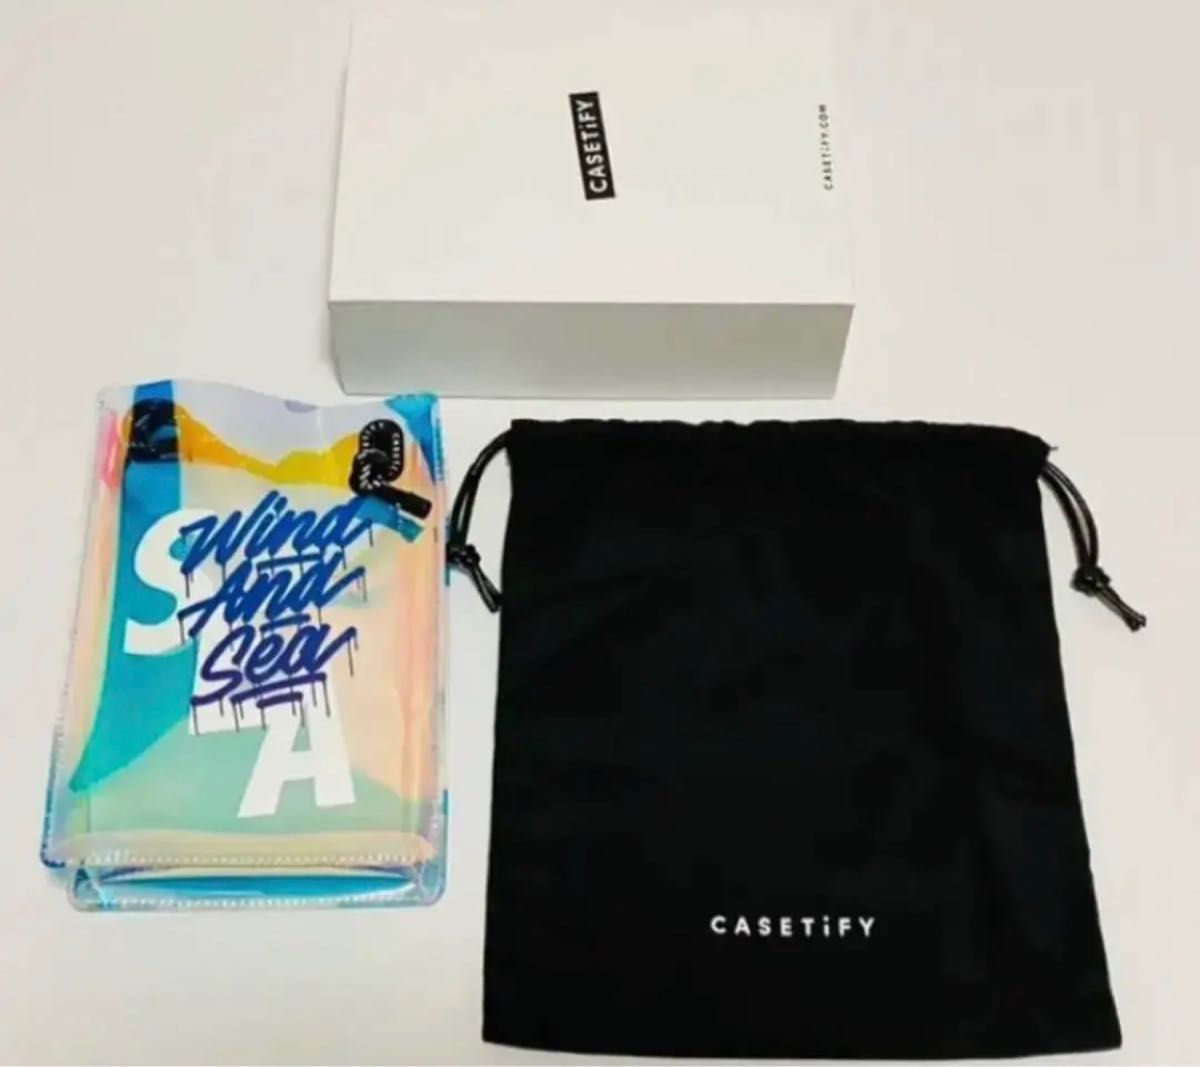 Wind and Sea CASETiFY ショルダーバッグ｜PayPayフリマ